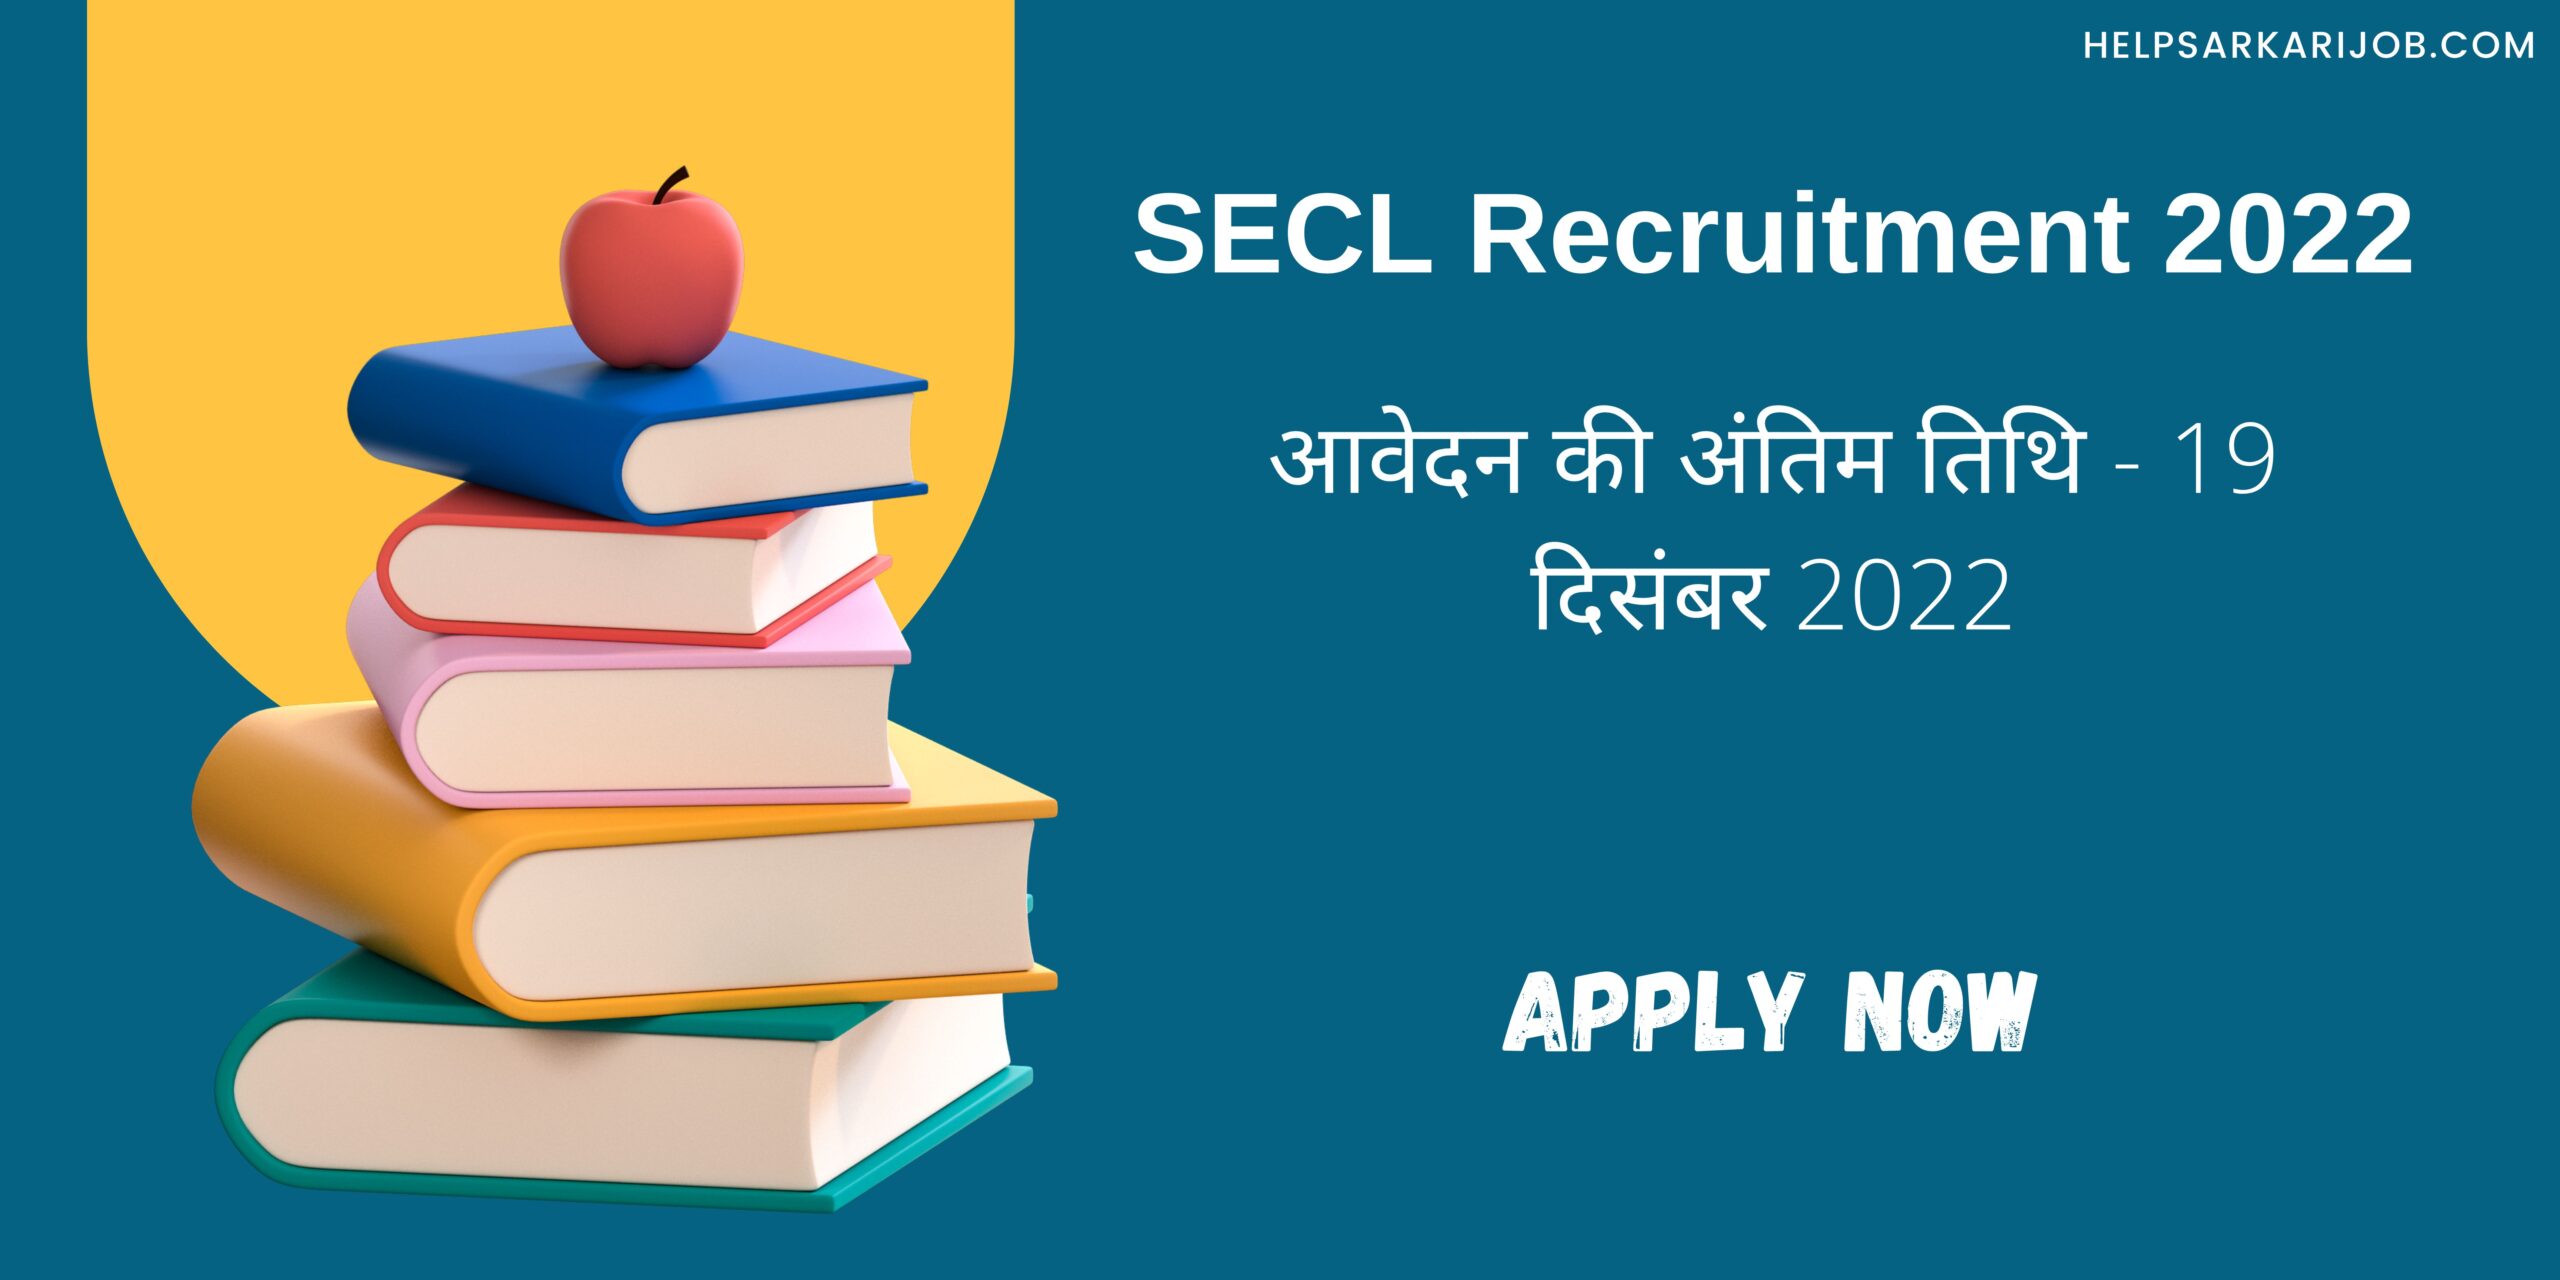 SECL Recruitment 2022 last date to apply